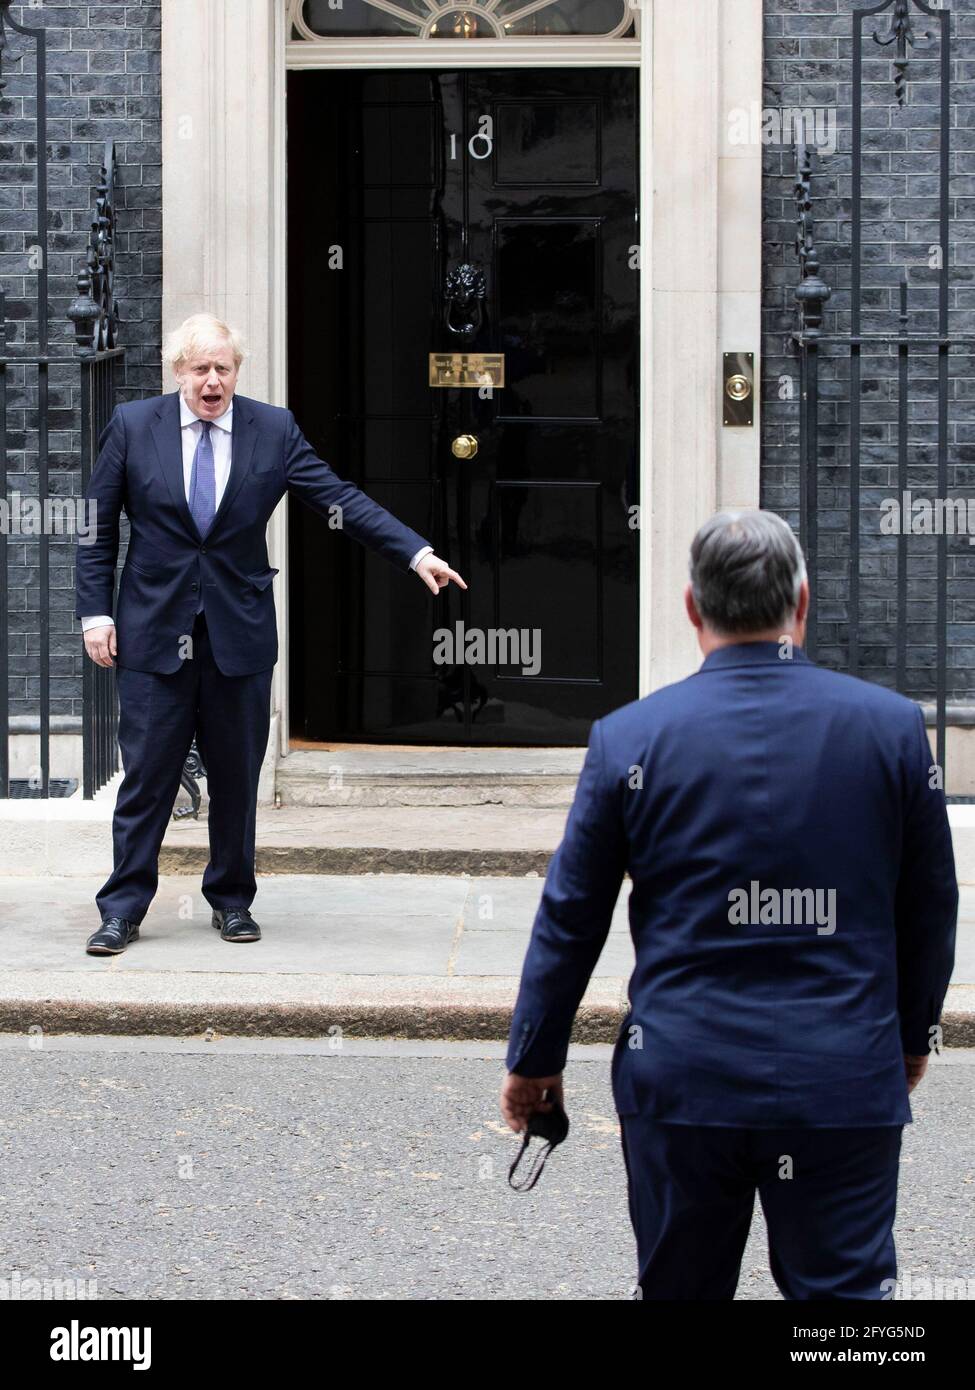 UK Prime Minister Boris Johnson welcomes Hungarian PM Viktor Mihály Orbán to 10 Downing Street on the 28th of May 2021, as he is questioned  by press. Stock Photo